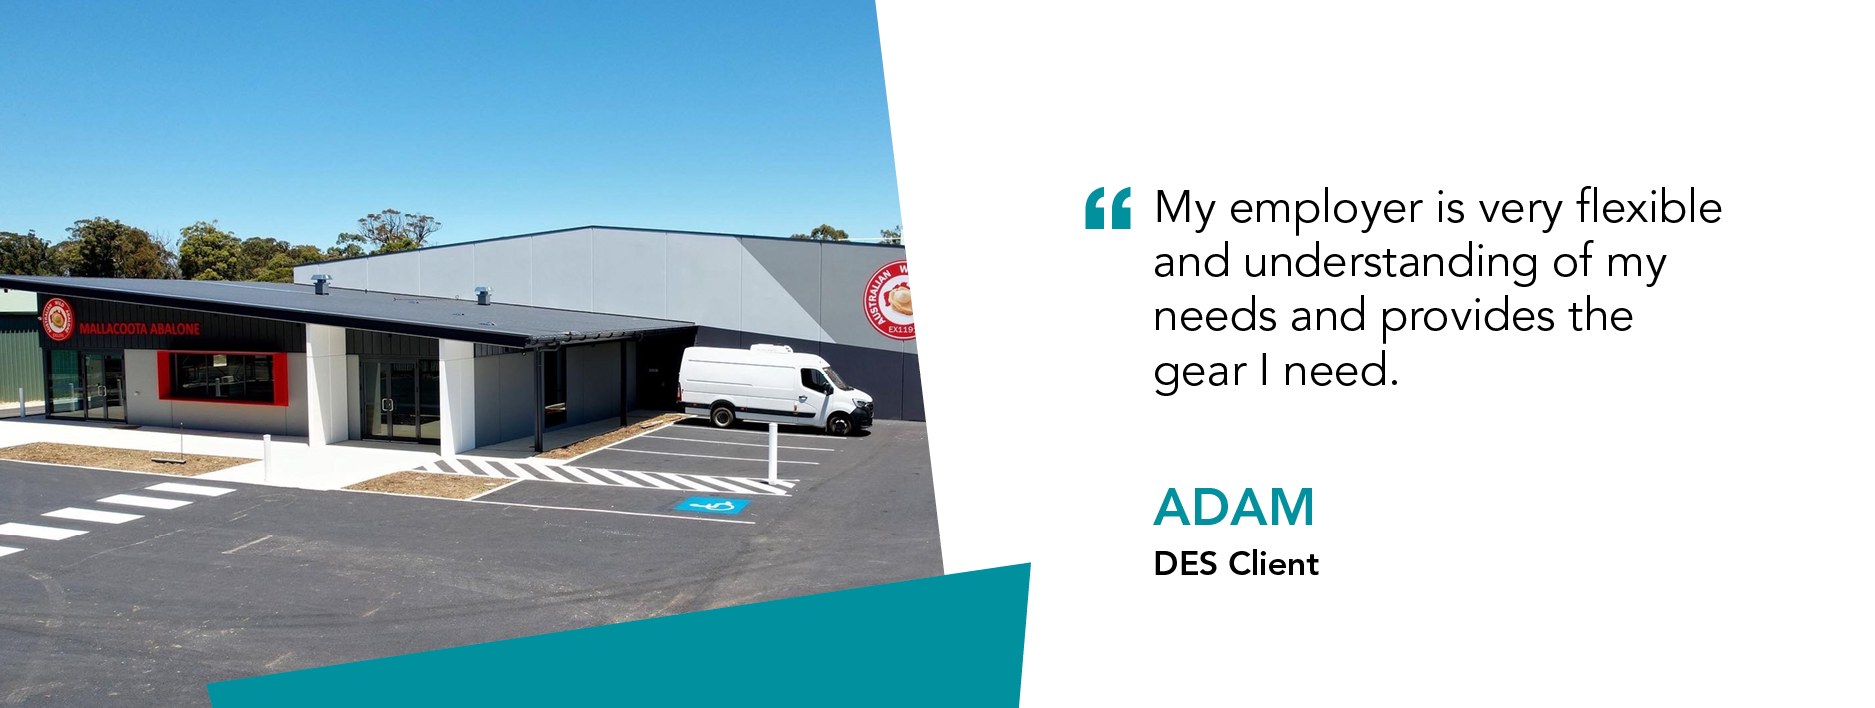 Brand new factory with quote "My employer is very flexible and understanding of my needs and provides the gear I need." said Adam DES Client